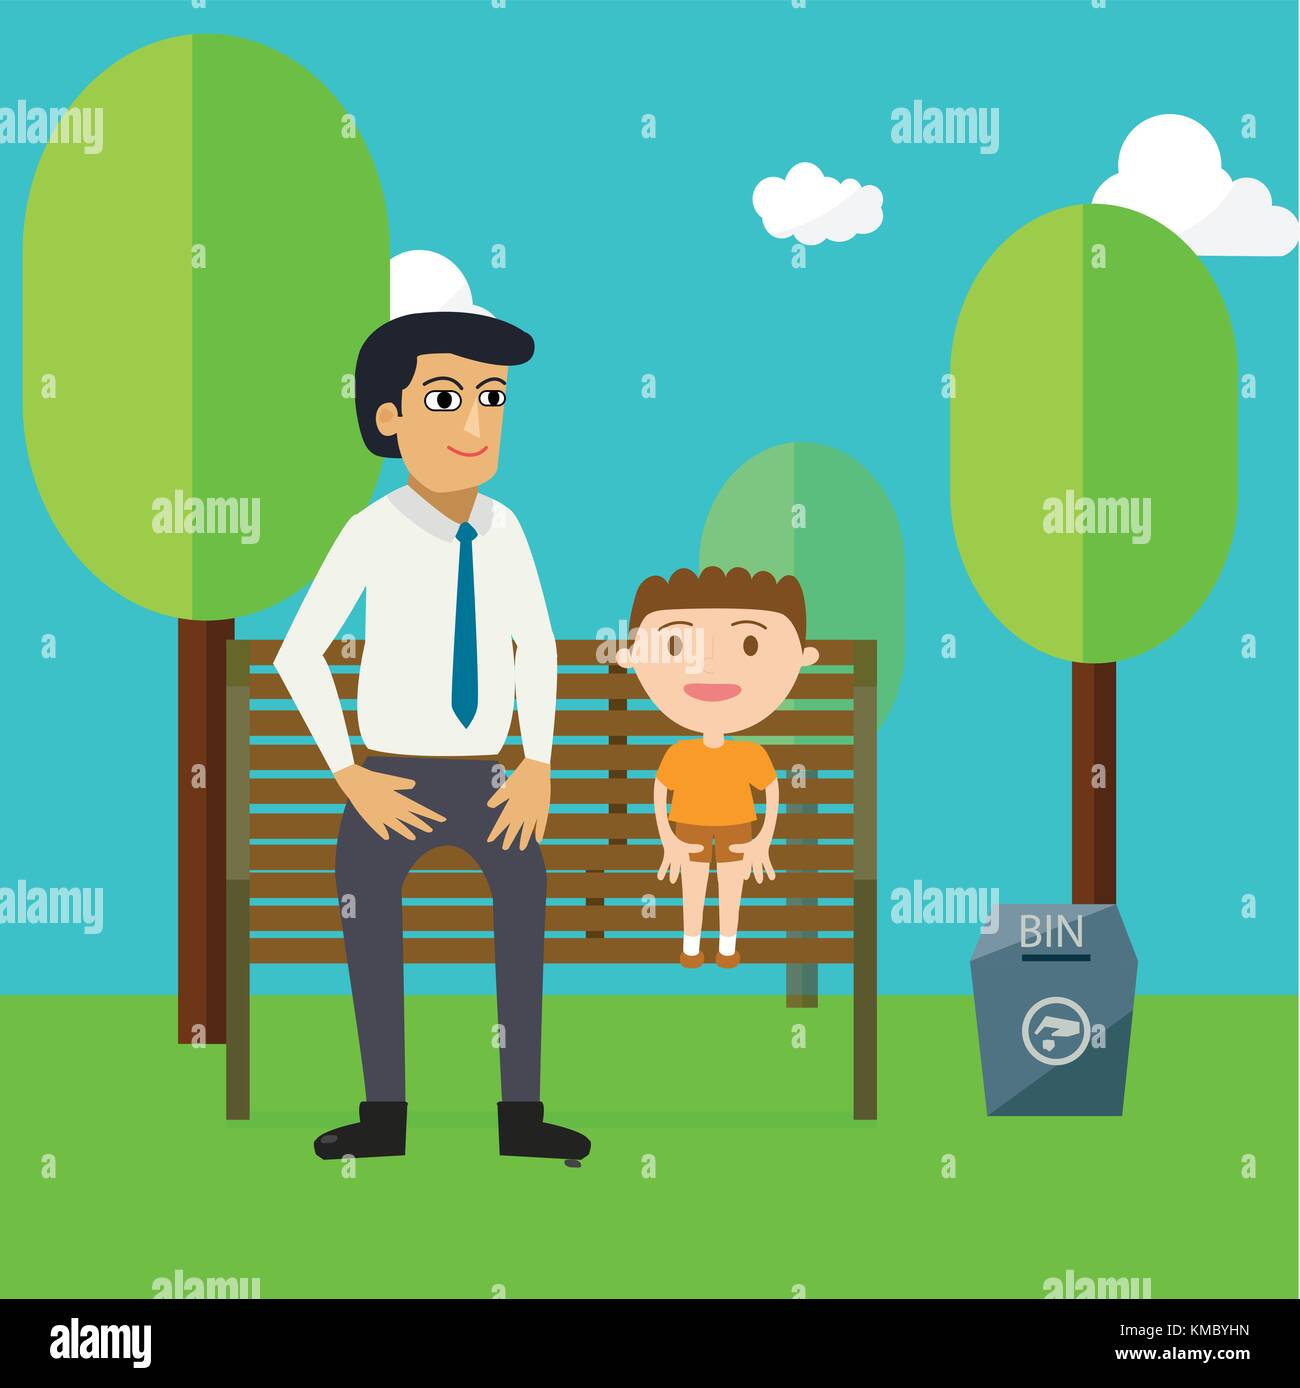 Family day with father and son cartoon characters relax in park.They sit on wooden public chairs and blue bin side with tree,clouds and sky Stock Vector